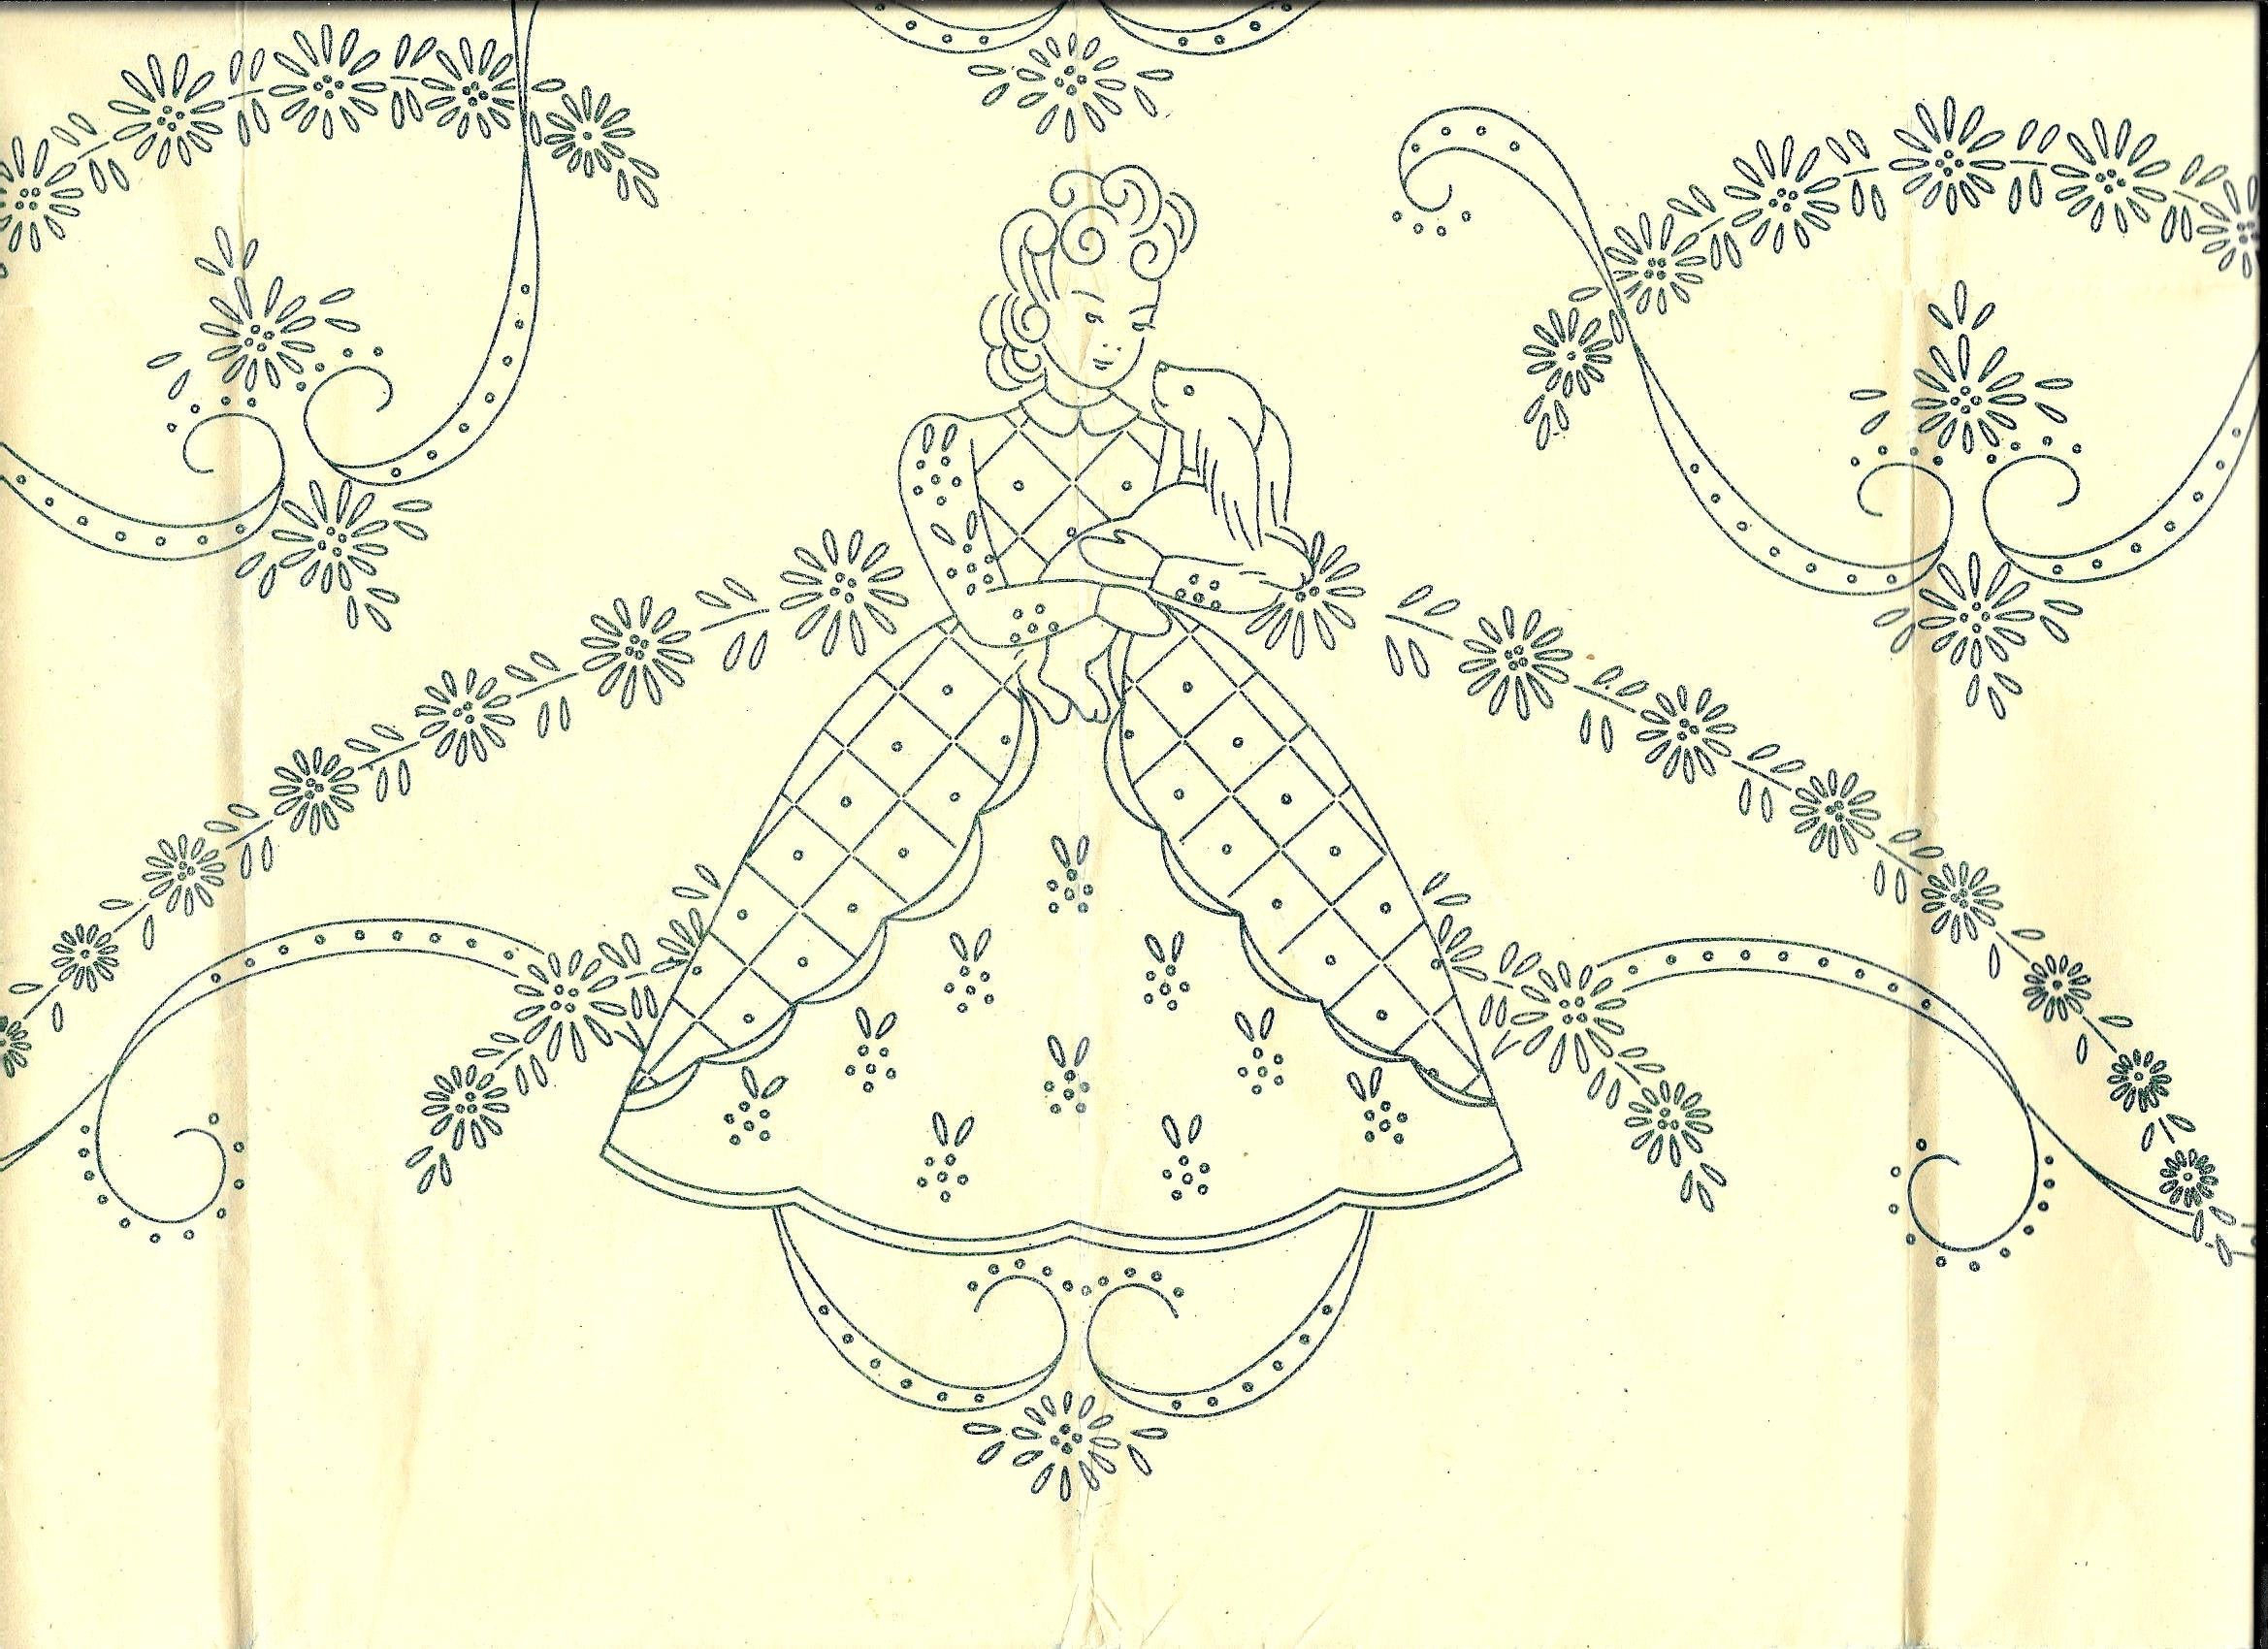 Vintage Embroidery Transfer Patterns Vintage Embroidery Transfer Pattern 7736 1950s Mail Order Lady Hoop Skirt W Floral Motif For Pillow Cases Scarf Tablecloth Napkins